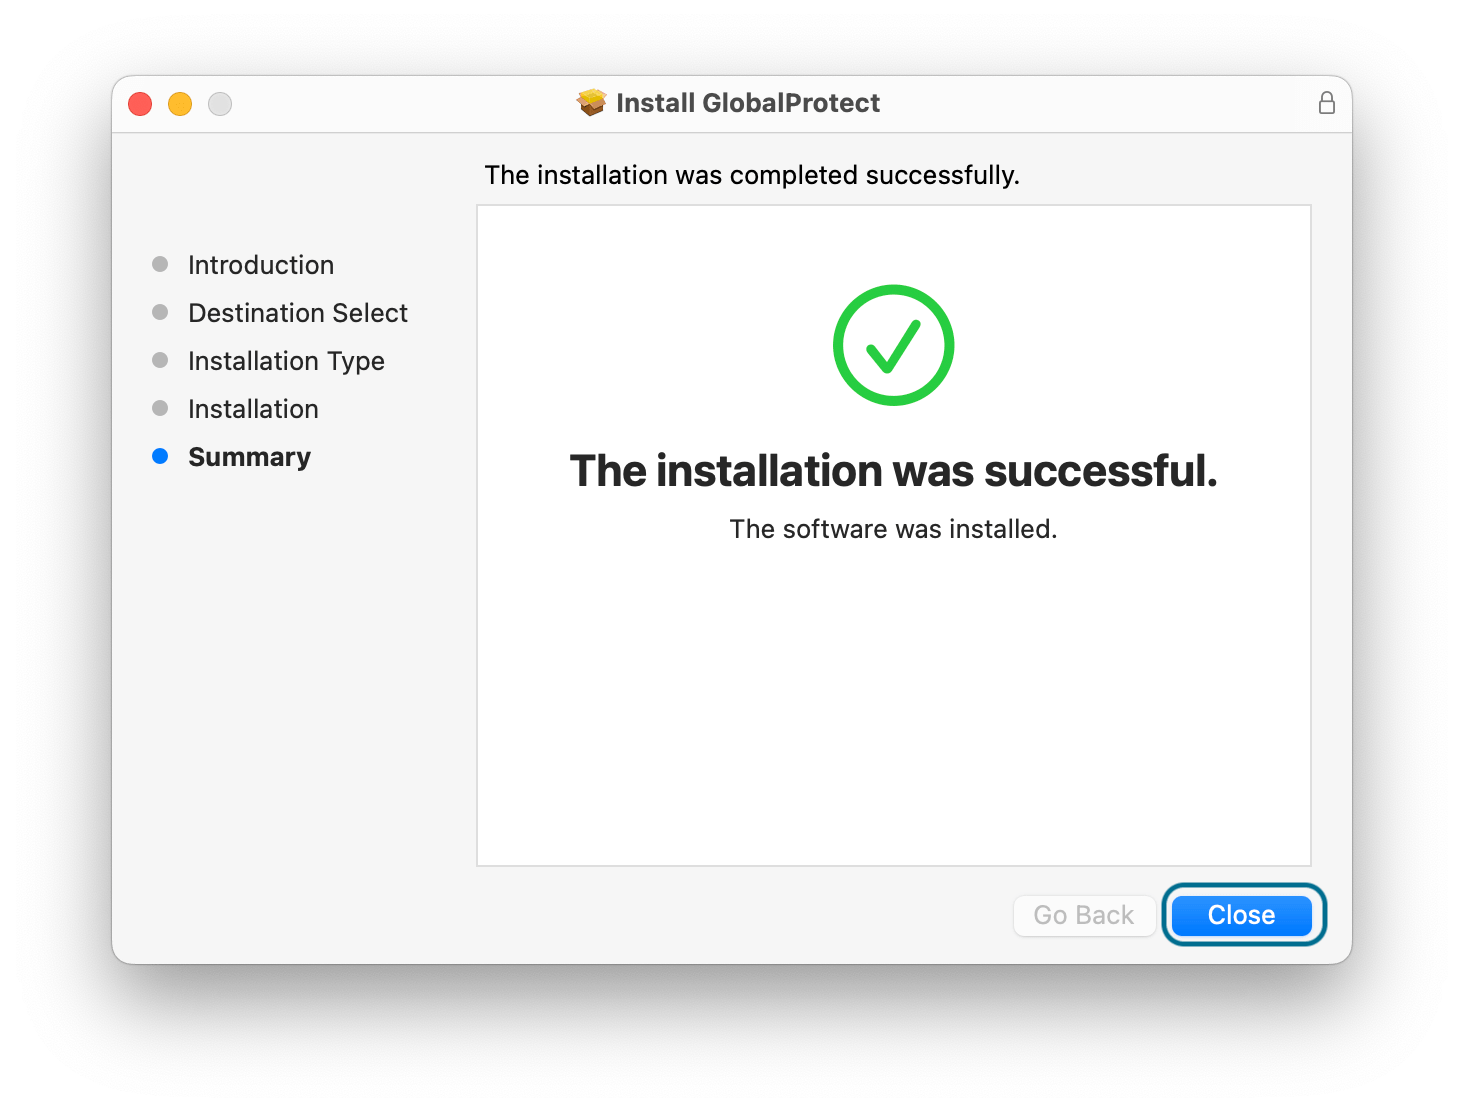 Global Protect installer final screen, click 'Close' to continue